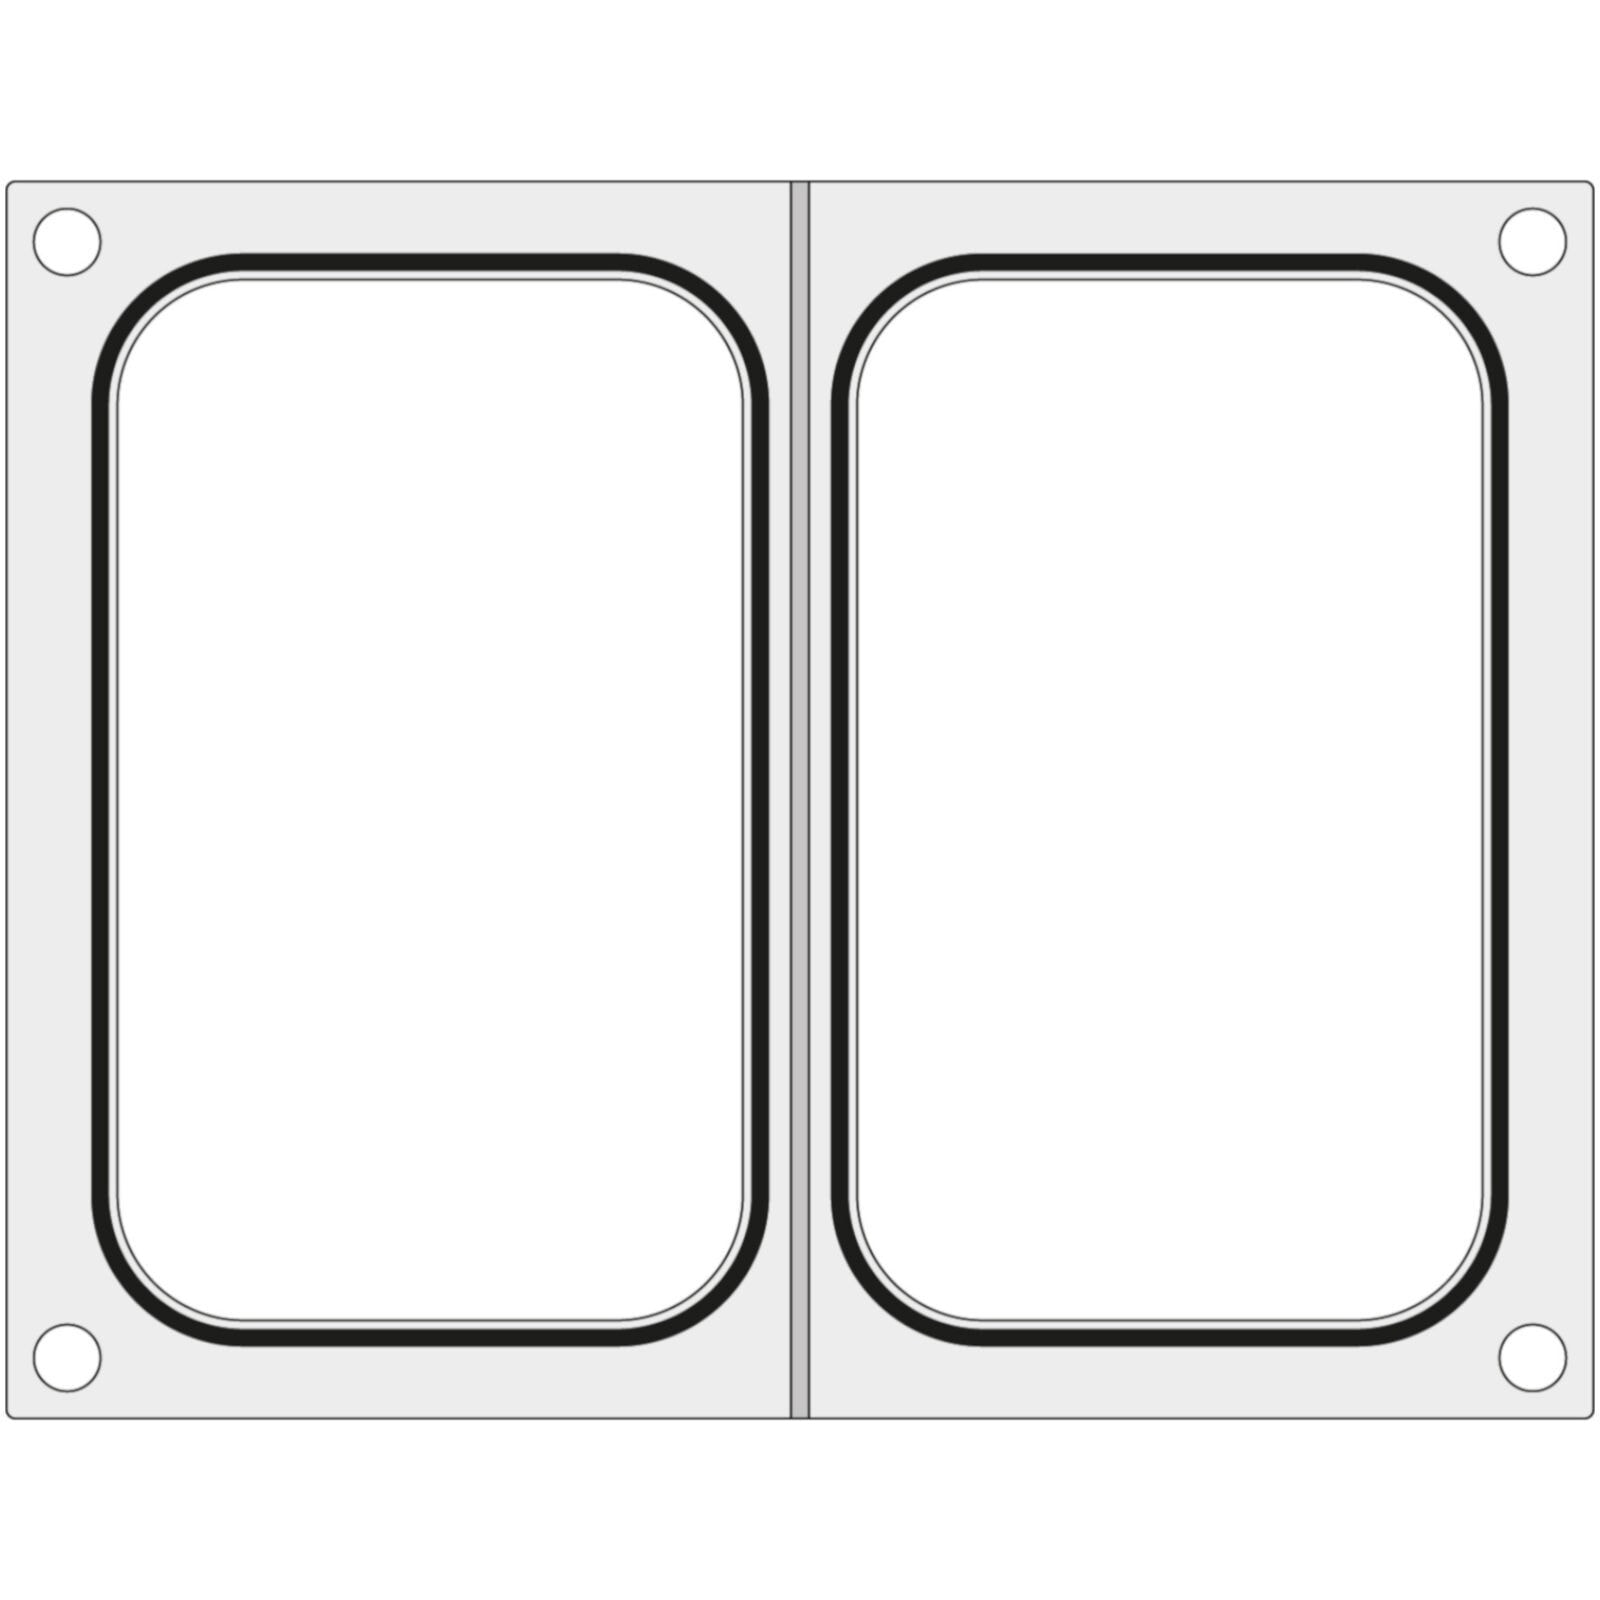 Mat template for CAS CDS-01 welding machine for two trays, 178x113 mm containers - Hendi 805350